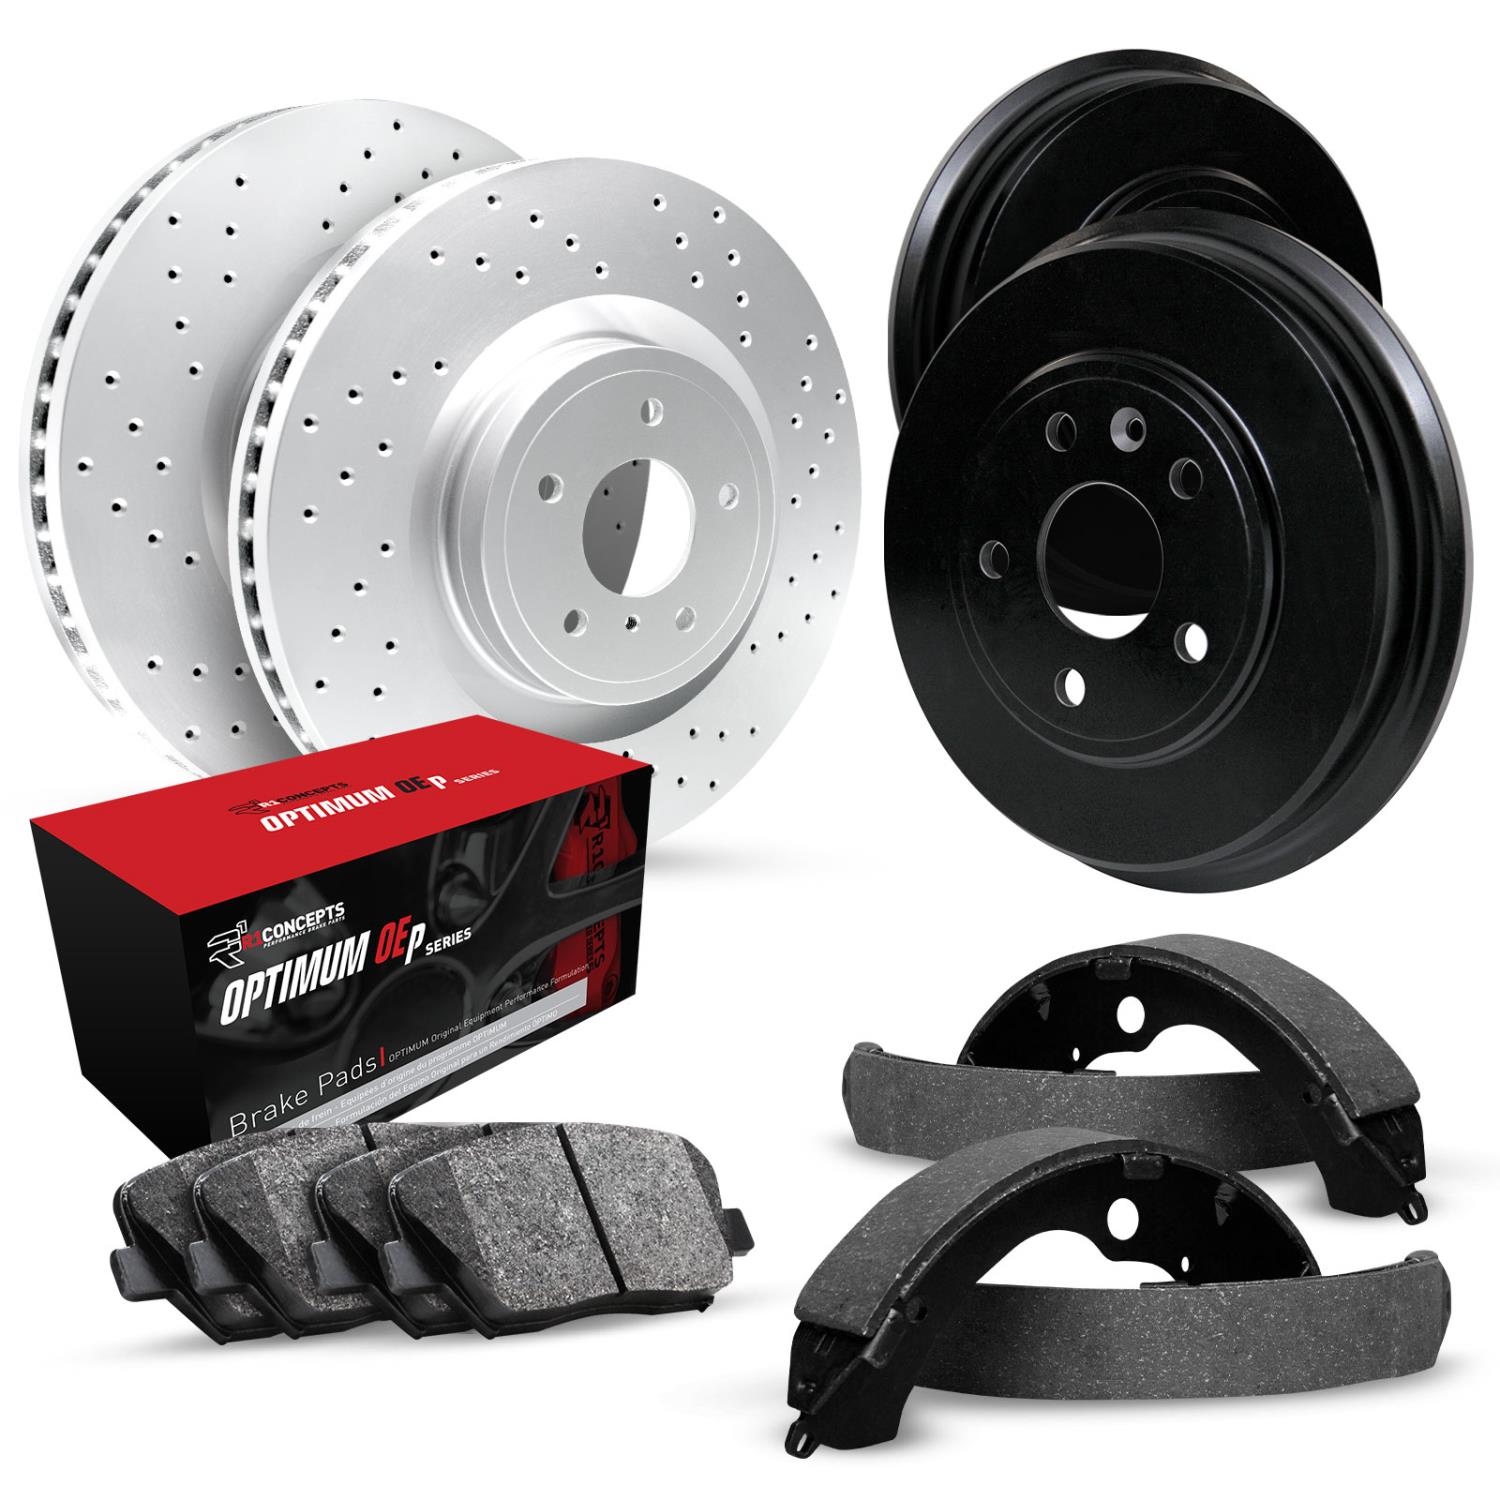 GEO-Carbon Drilled Brake Rotor & Drum Set w/Optimum OE Pads & Shoes, 1994-1996 GM, Position: Front & Rear